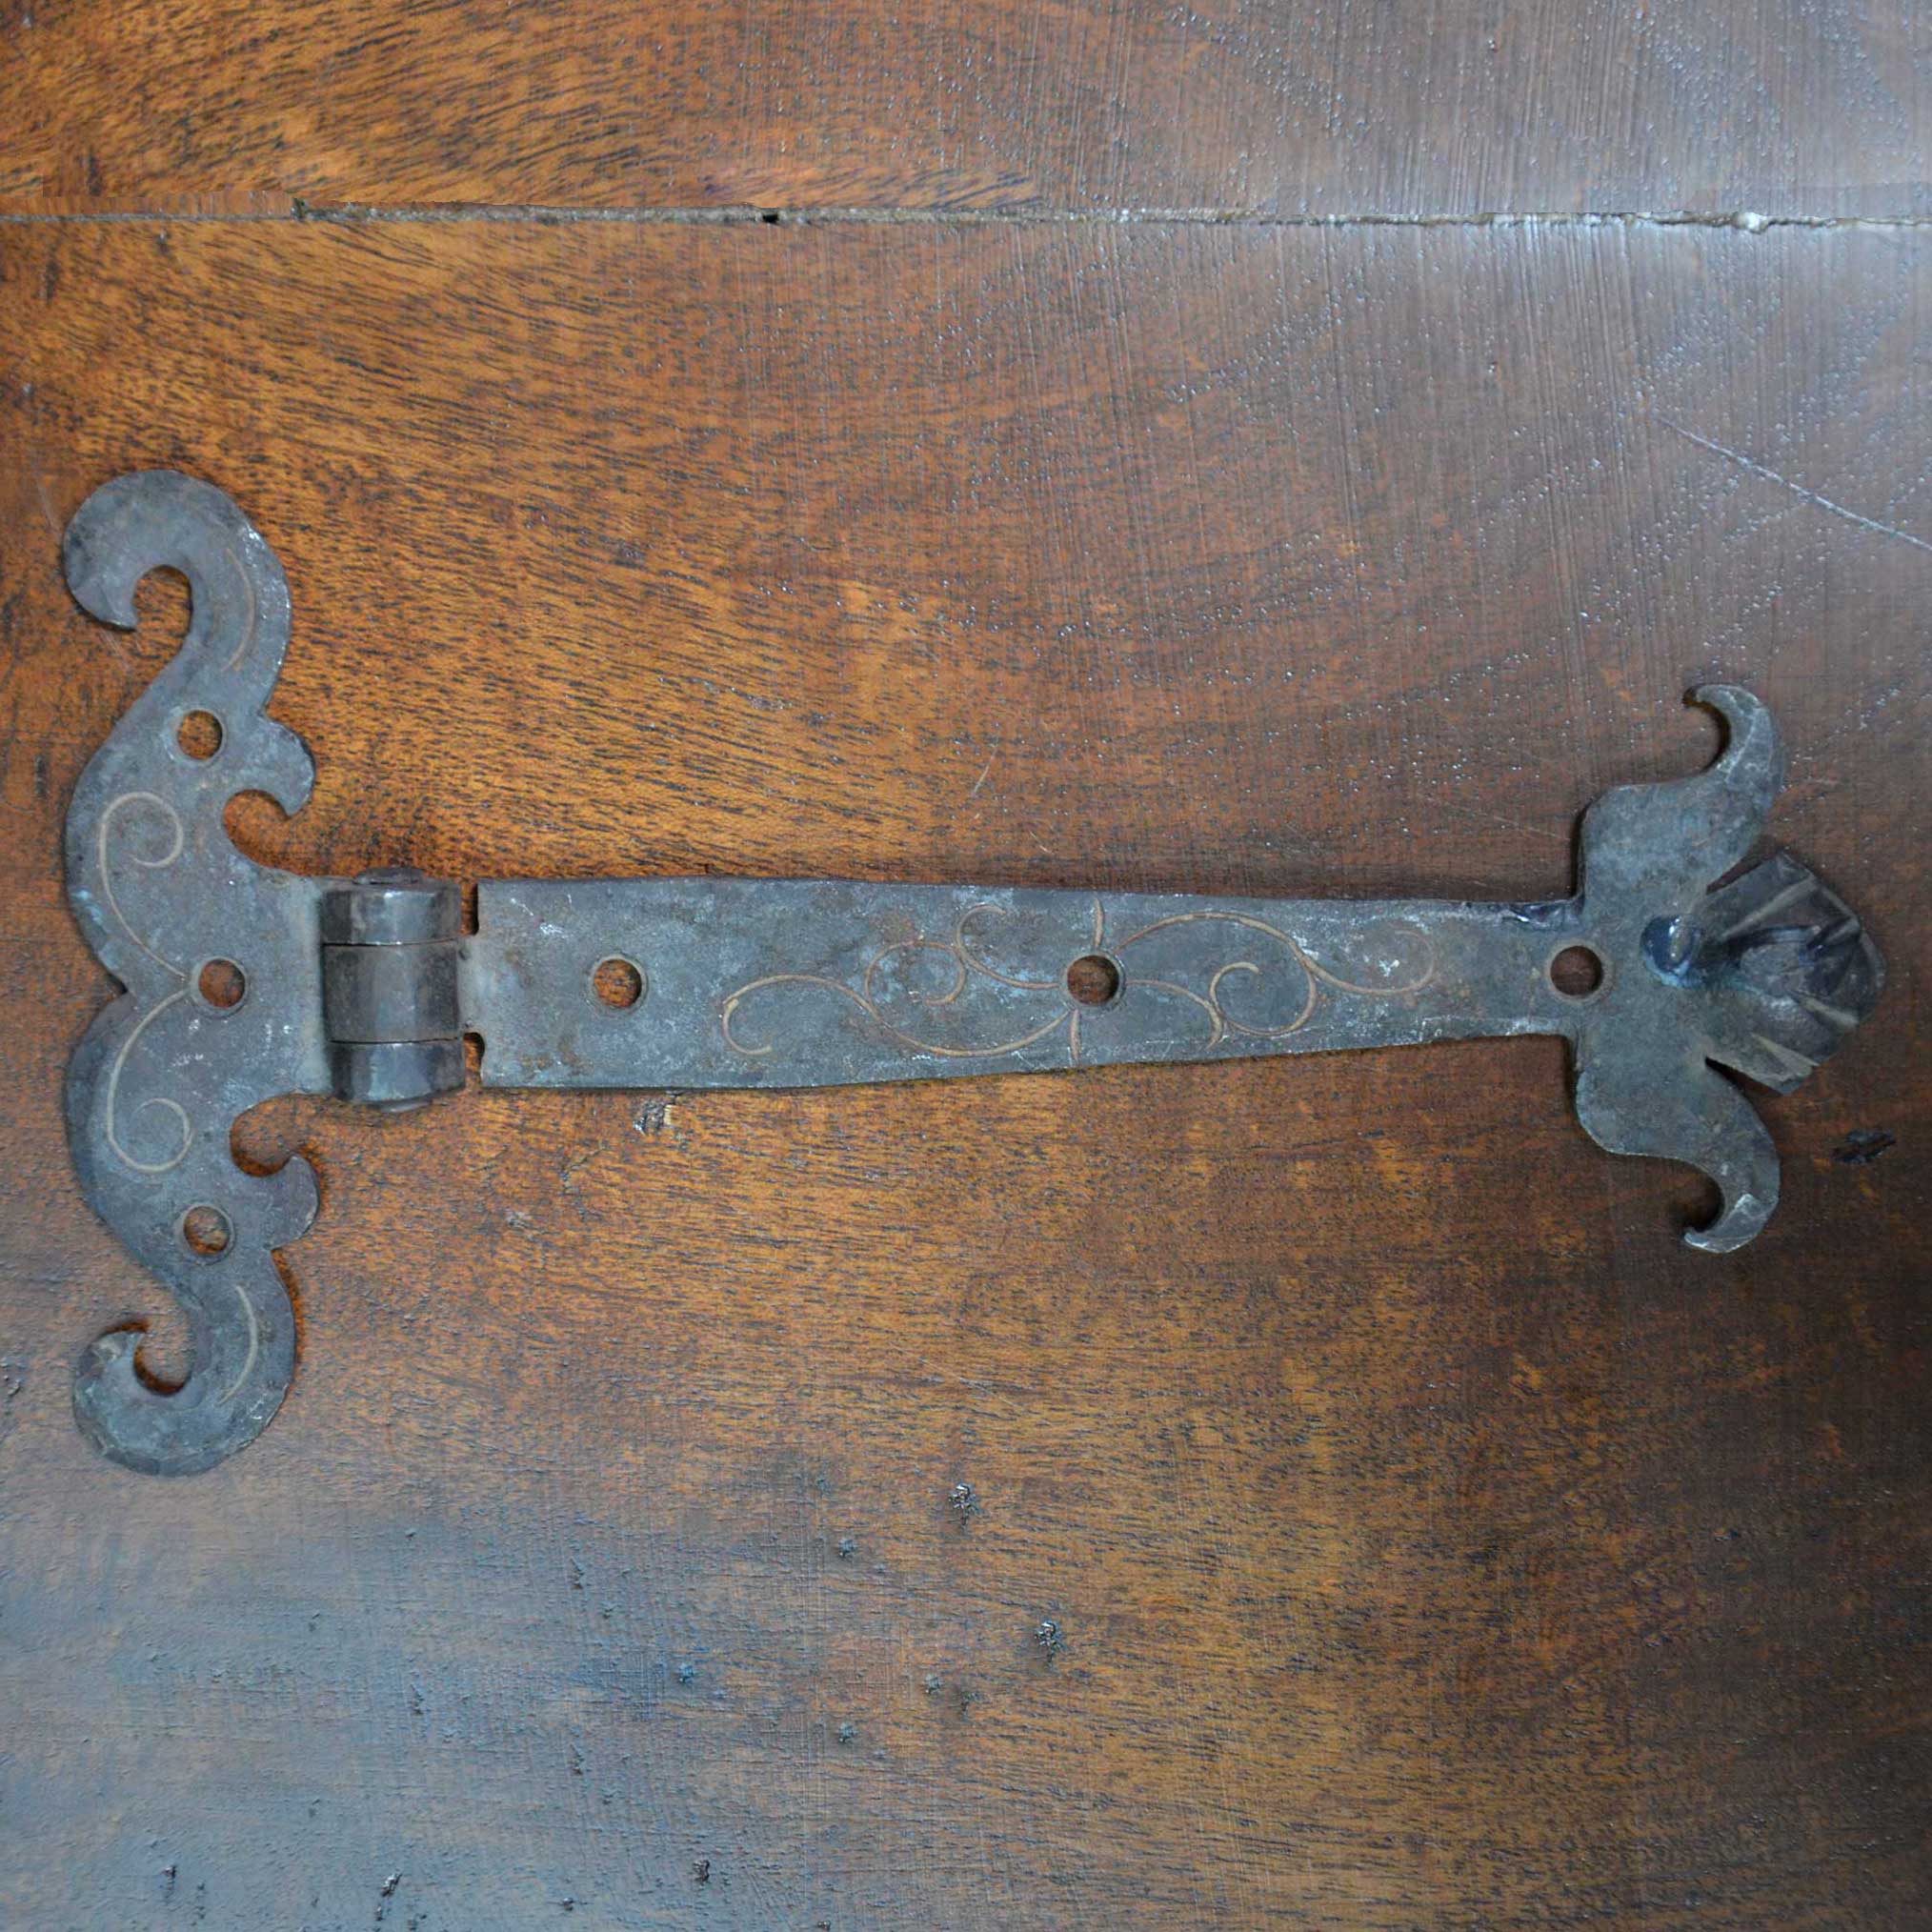 Small Leaf Hinge, Antique Strap Hinges, Mexican Door Hardware